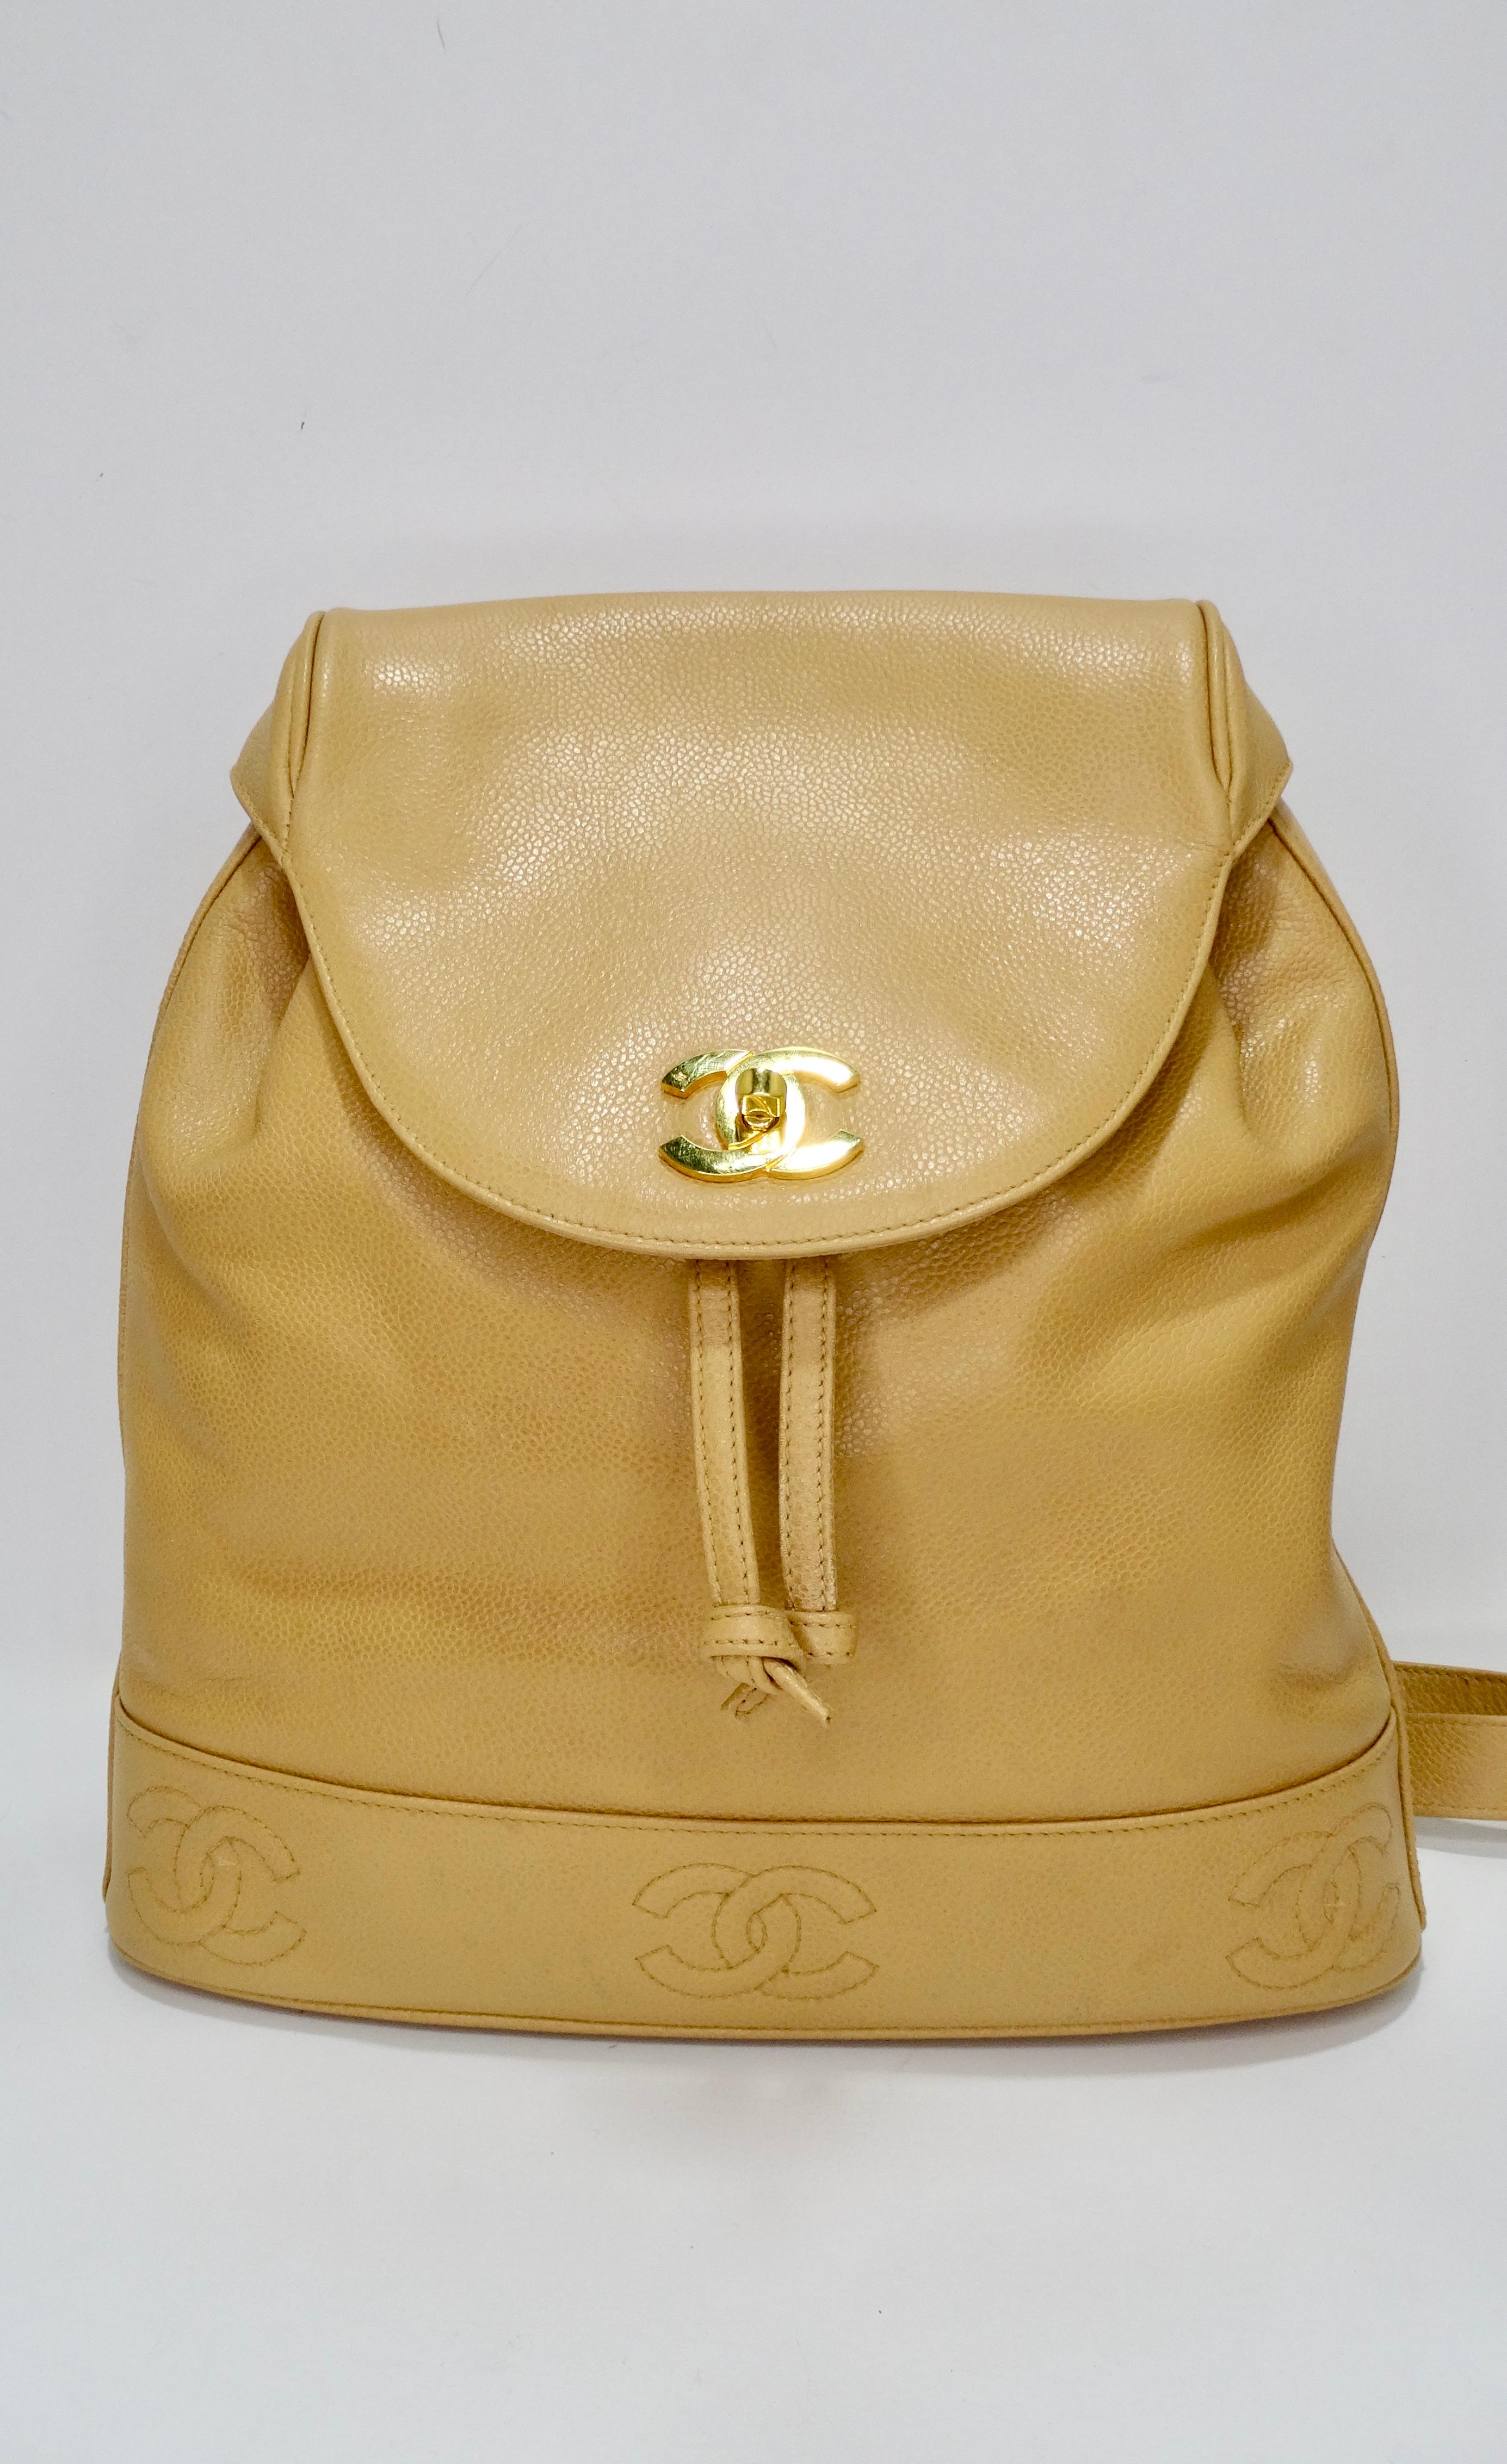 Keep it classic with this timeless Chanel backpack! Circa 1995, this backpack is crafted from tan caviar leather and features a drawstring fastening, gold plated hardware, a CC turnlock closure and CC's stitched around the base. Dual adjustable